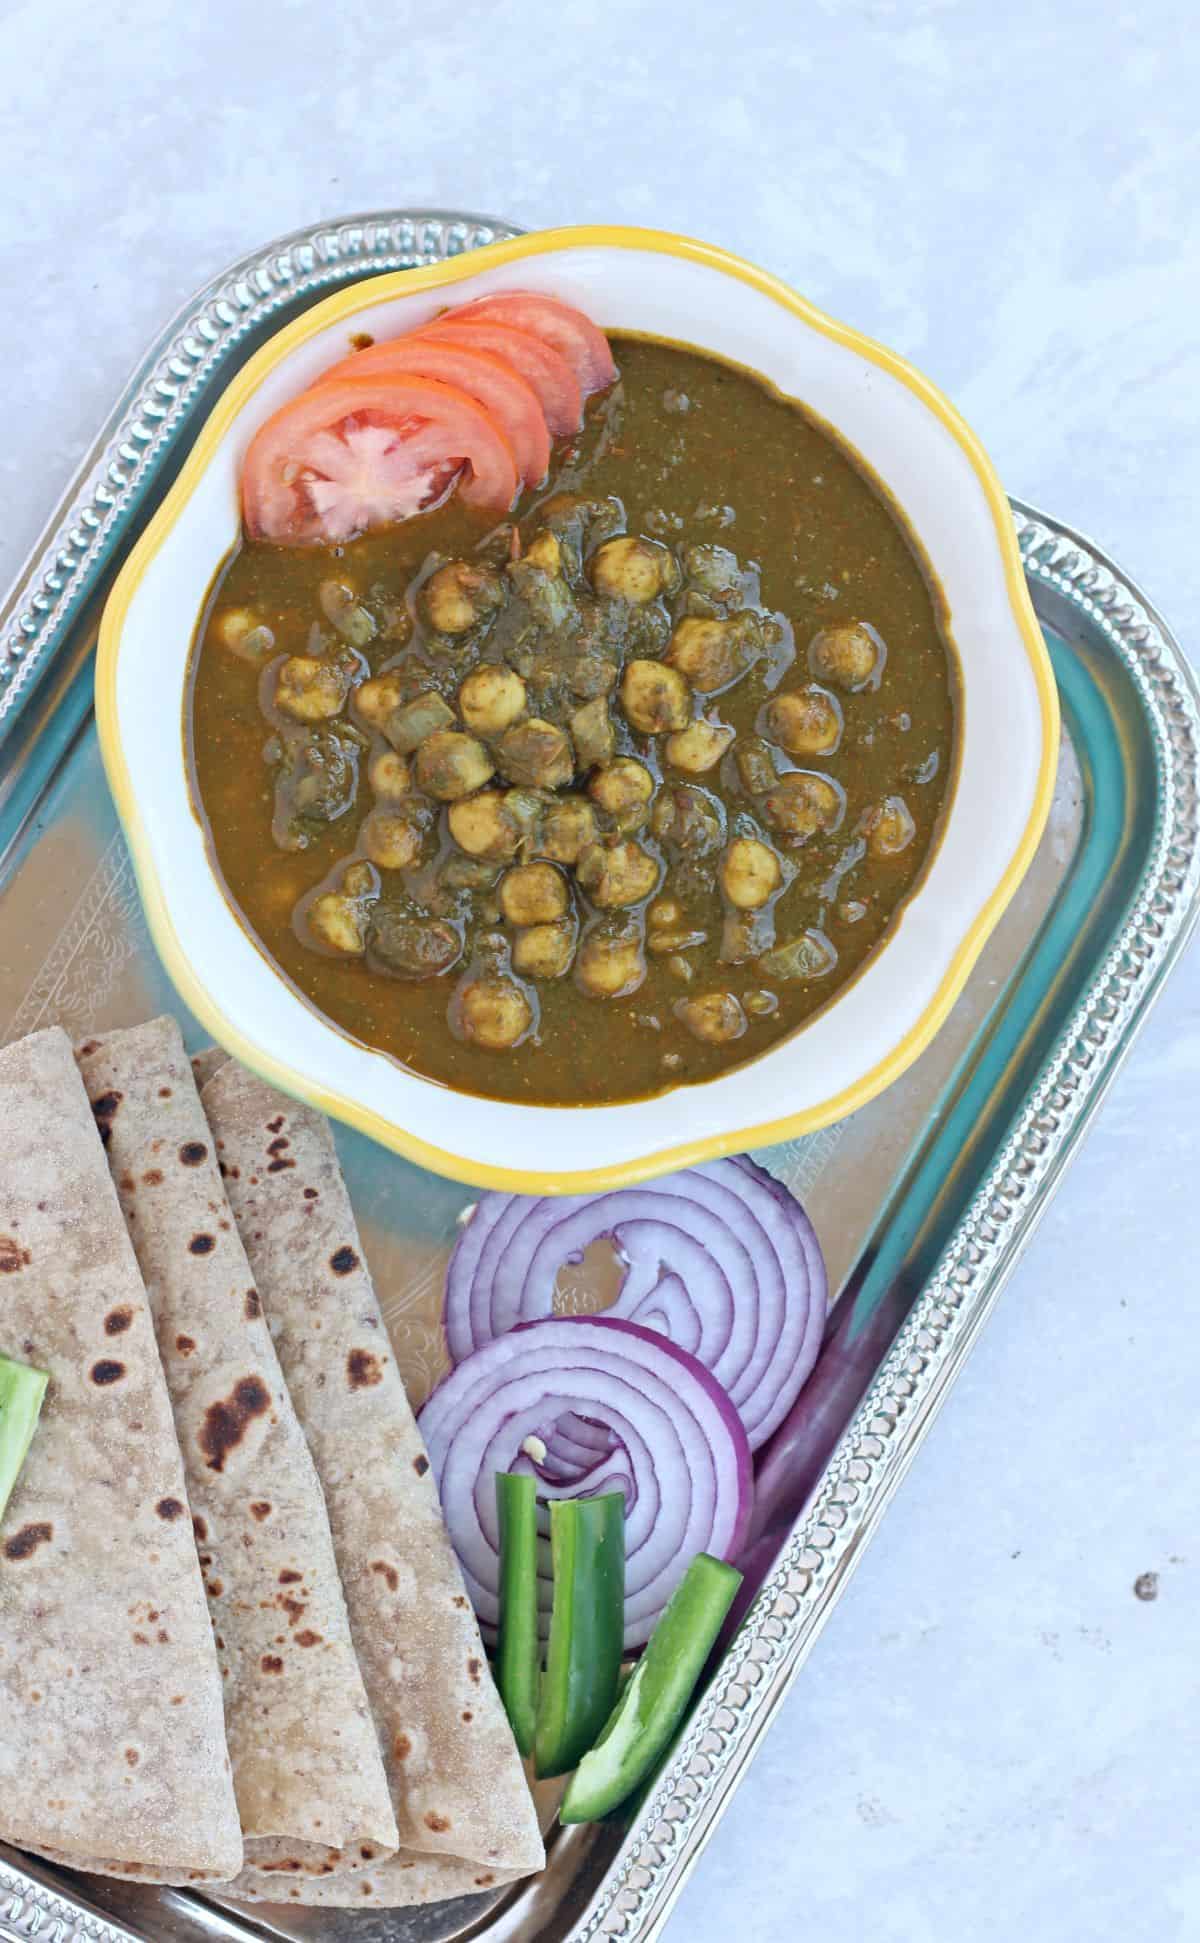 chana in palak subzi with roti and sliced onion and green chilies on side.